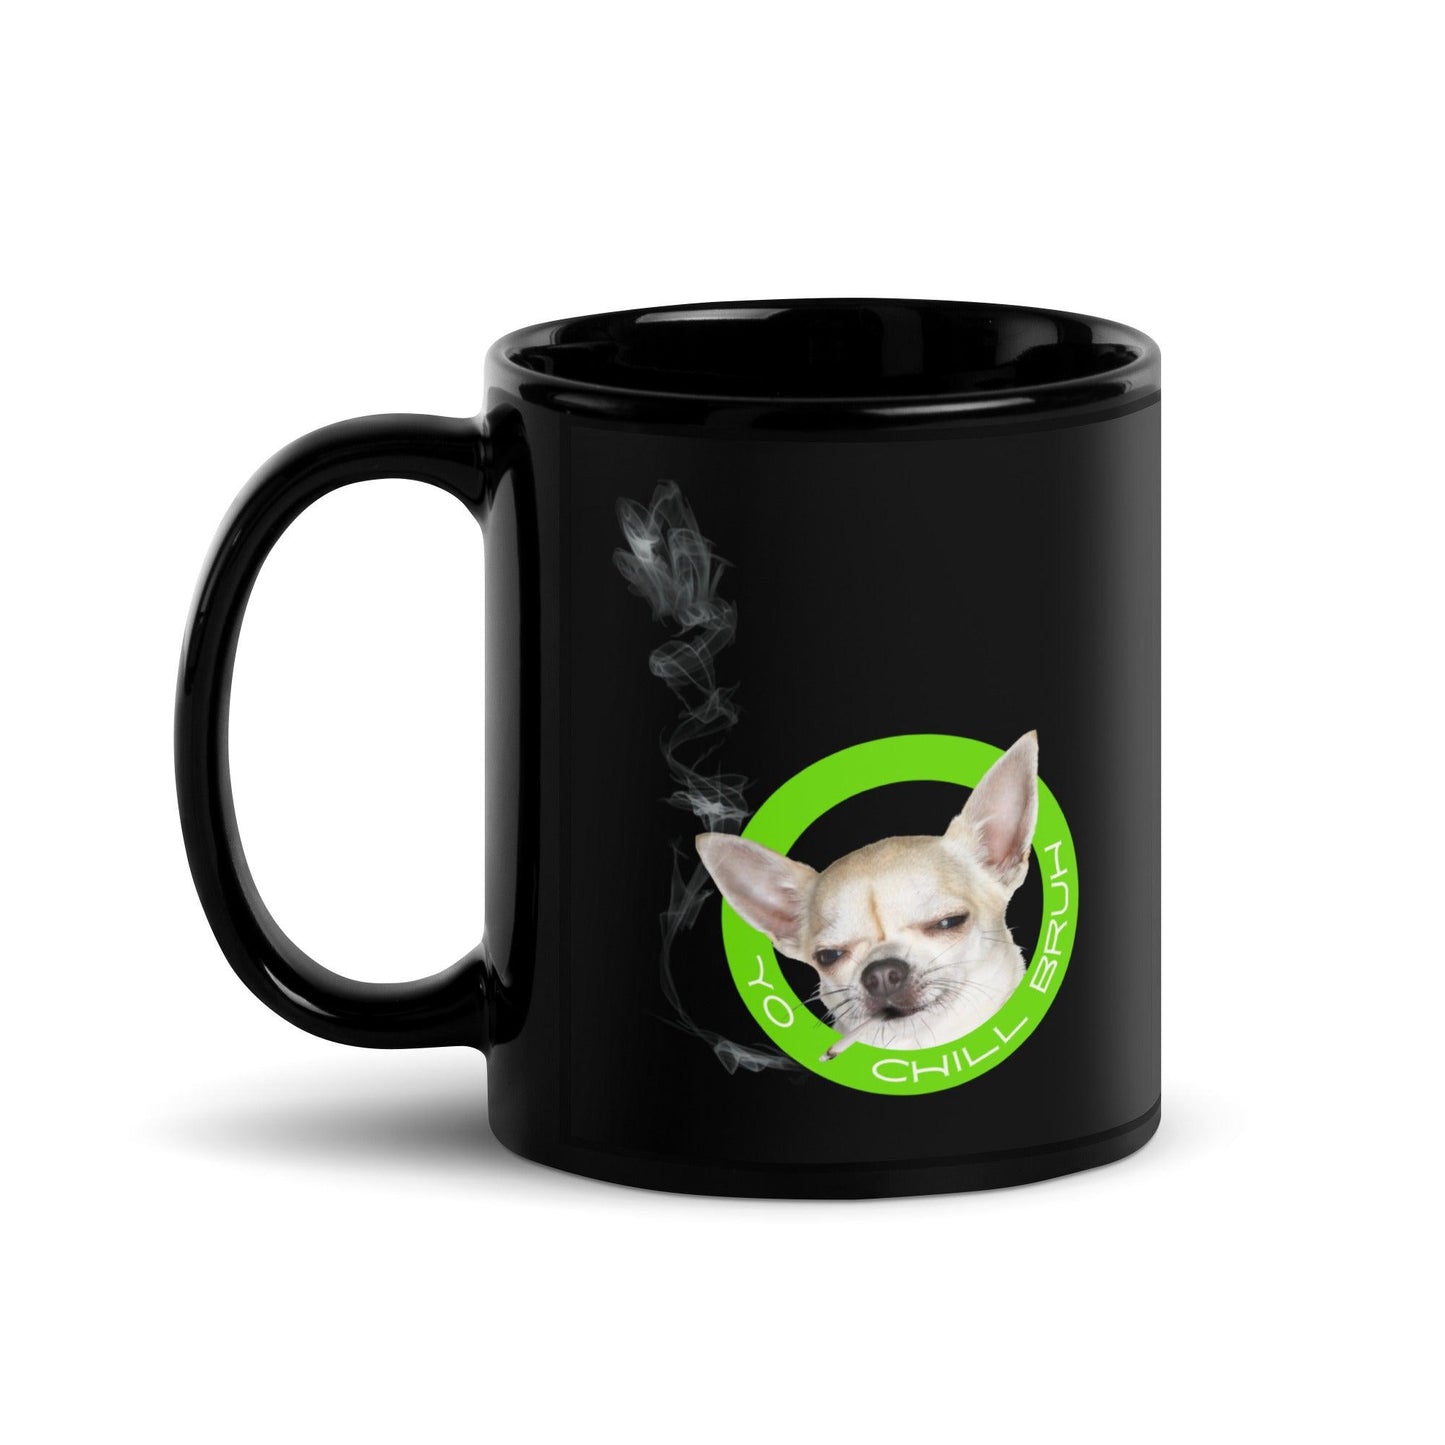 Be more chill chihuahua and relax with a cuppa. This glossy black mug features an artist's collage of a very chilled chi almost falling asleep with a smoking hand-rolled cigarette in his mouth, and the simple message: Yo chill bruh. A la Jessie in Breaking Bad. It's the coolest chihuahua meme you will find anywhere!